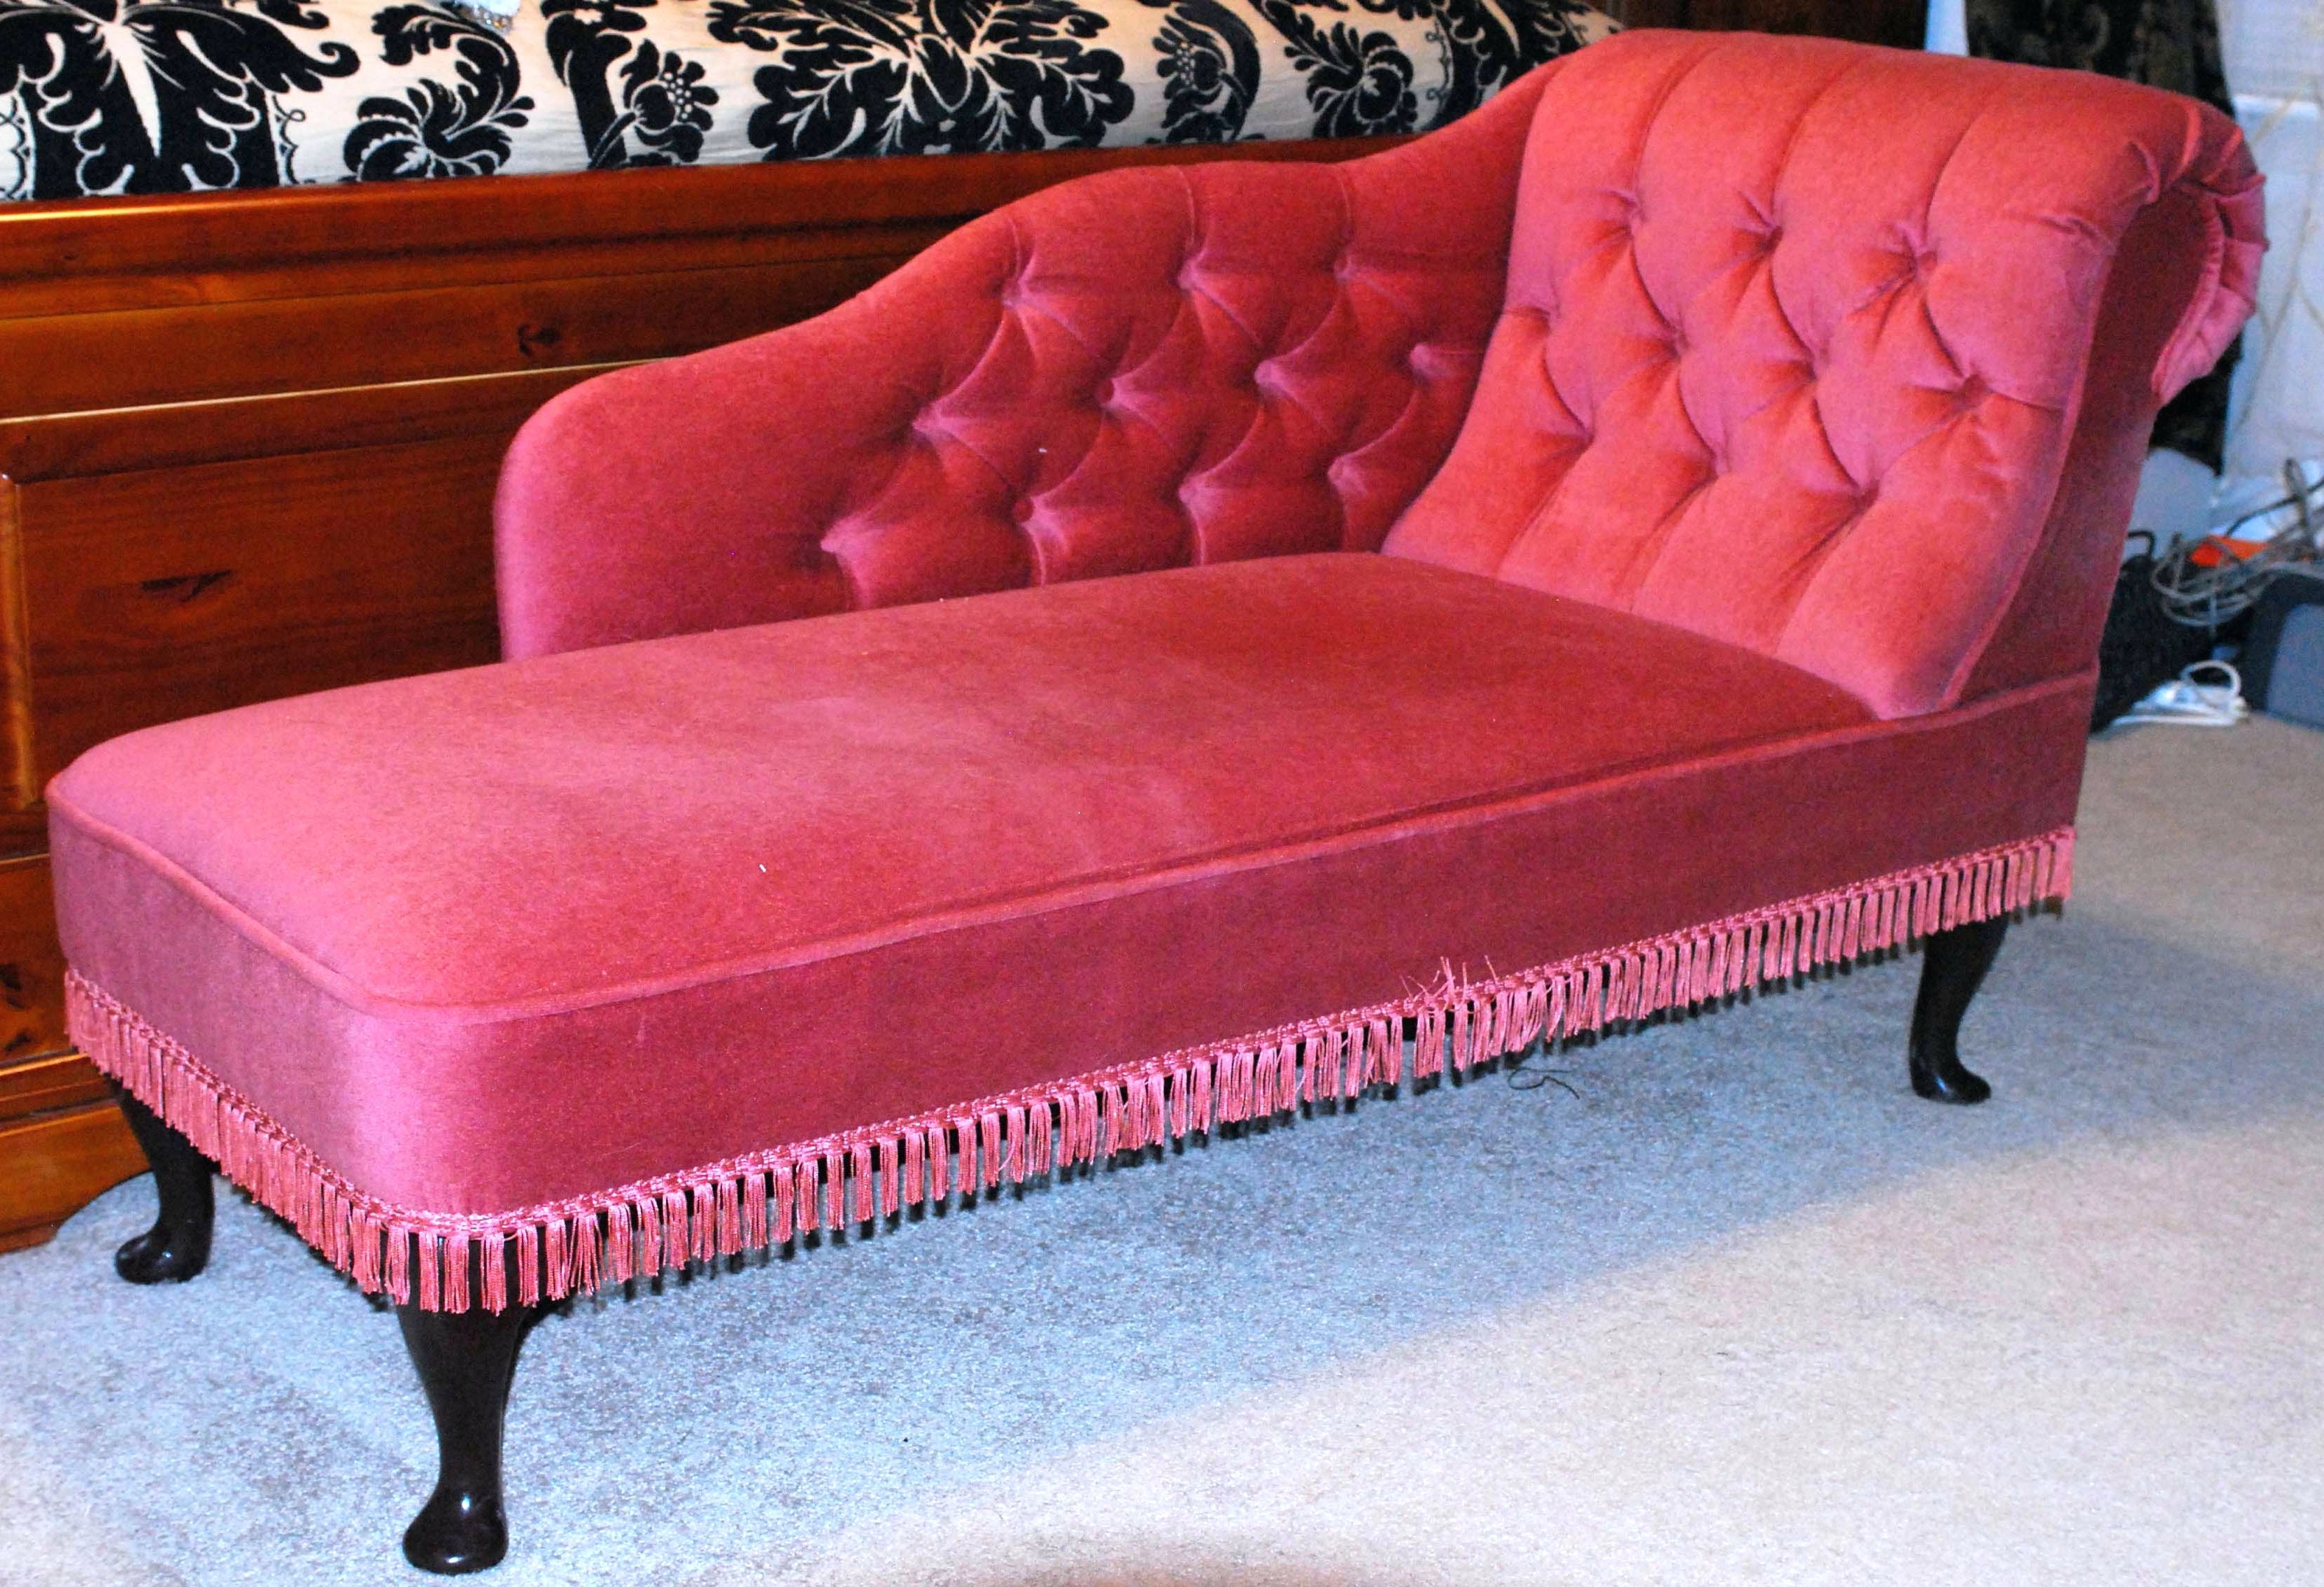 Well Liked Pink Chaise Lounge Chair • Lounge Chairs Ideas With Pink Chaise Lounges (View 7 of 15)